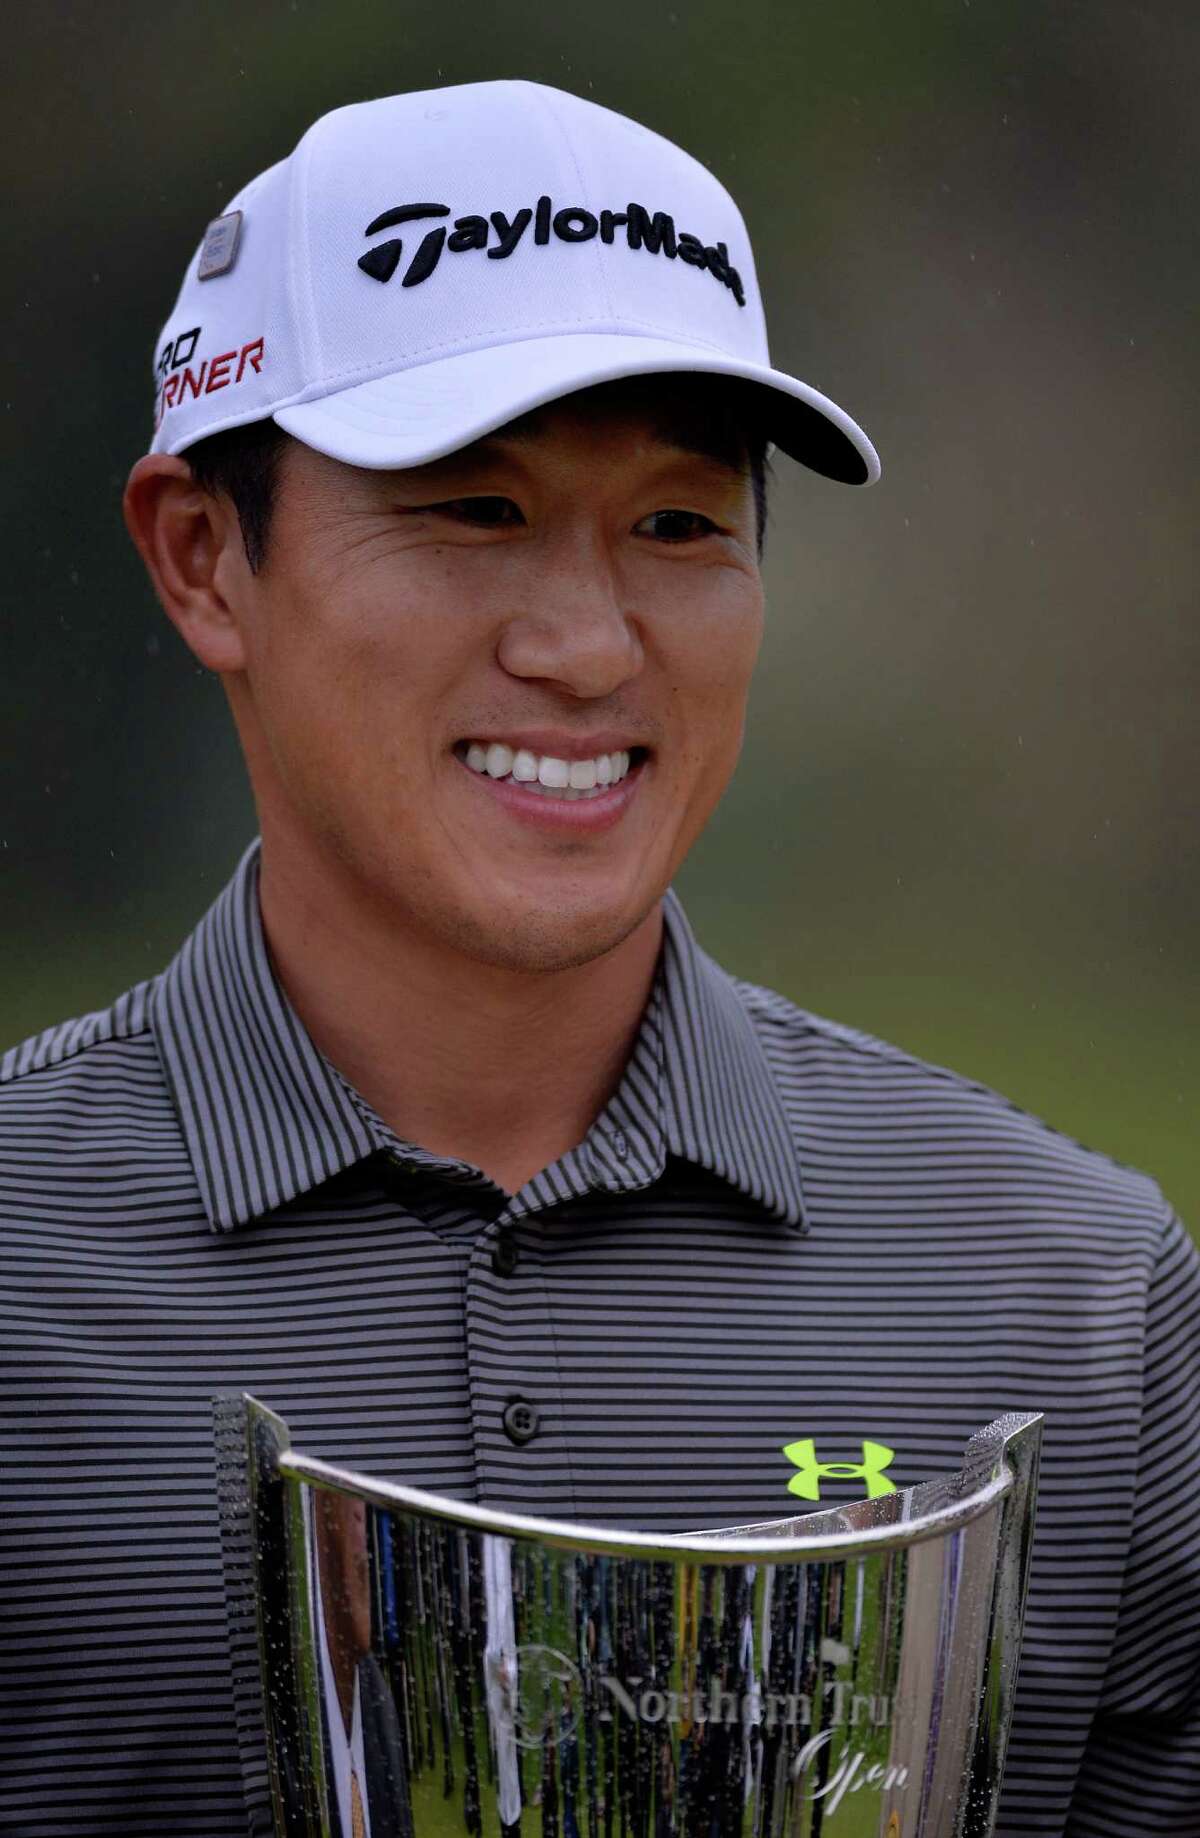 PACIFIC PALISADES, CA - FEBRUARY 22: James Hahn holds the trophy on the 18th hole after putting in for the win on the 14th hole during the third round playoff during the Final Round of the Northern Trust Open at the Riviera Country Club on February 22, 2015 in Pacific Palisades, California. (Photo by JD Cuban/Getty Images)